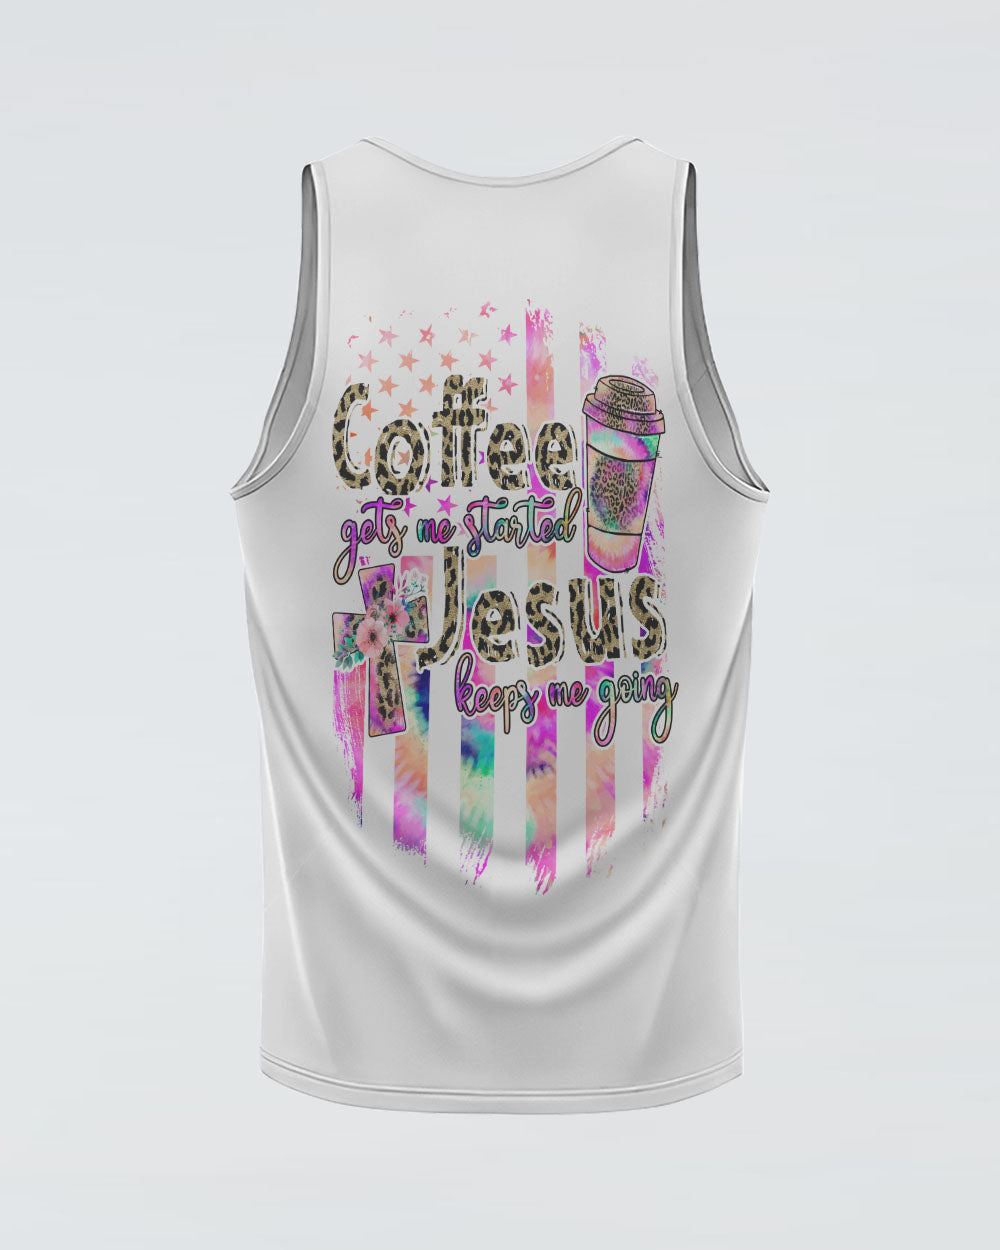 Coffee Gets Me Started Jesus Keeps Me Going Colorful Cross Faith Flag Tie Dye Women's Christian Tanks